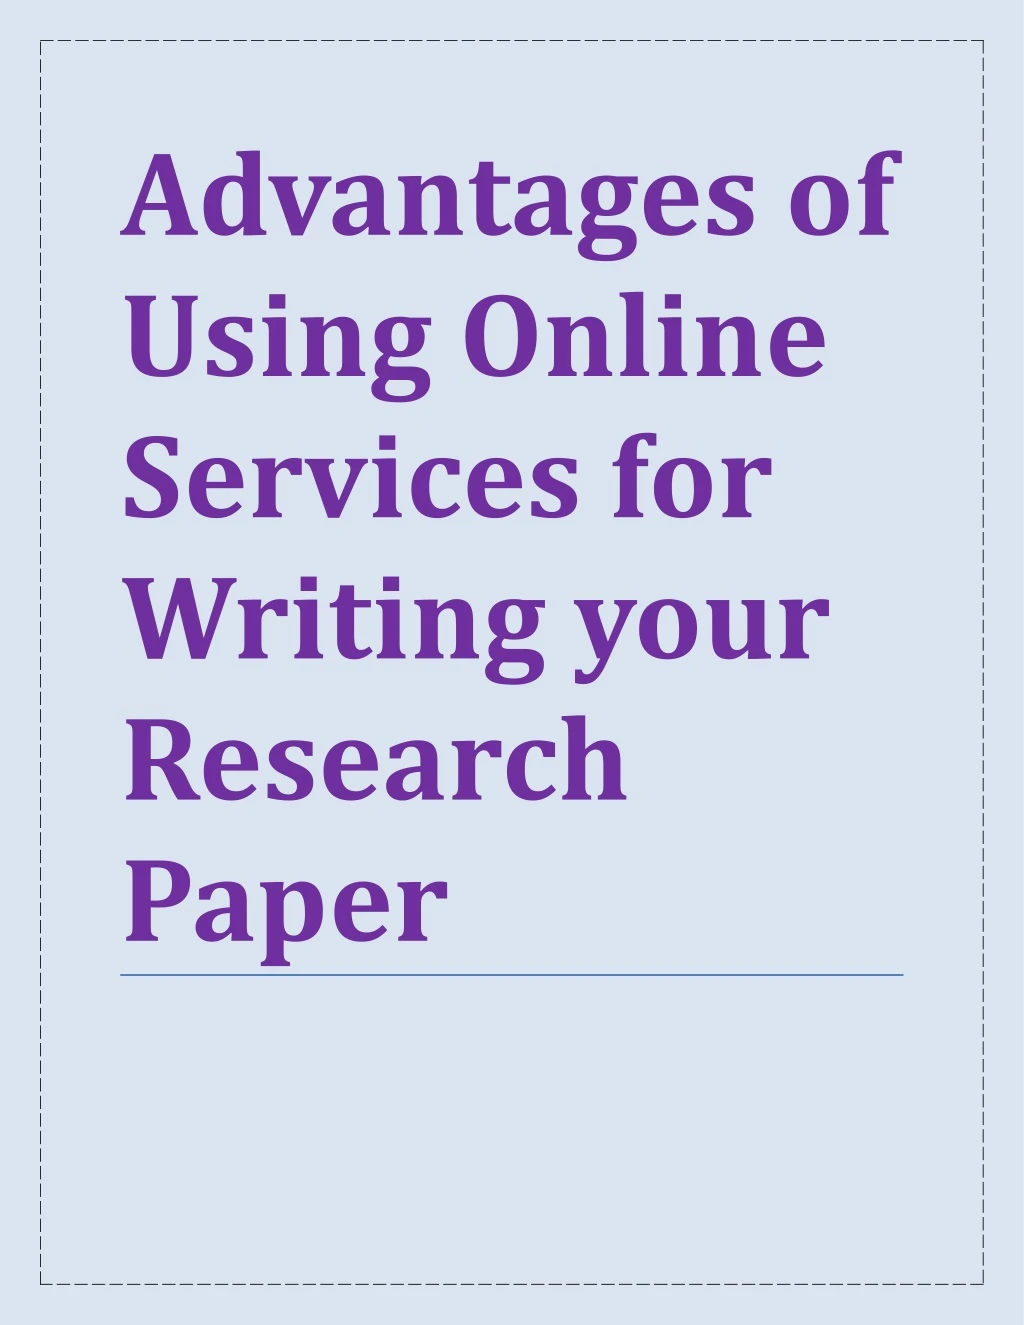 advantages of using online services for writing